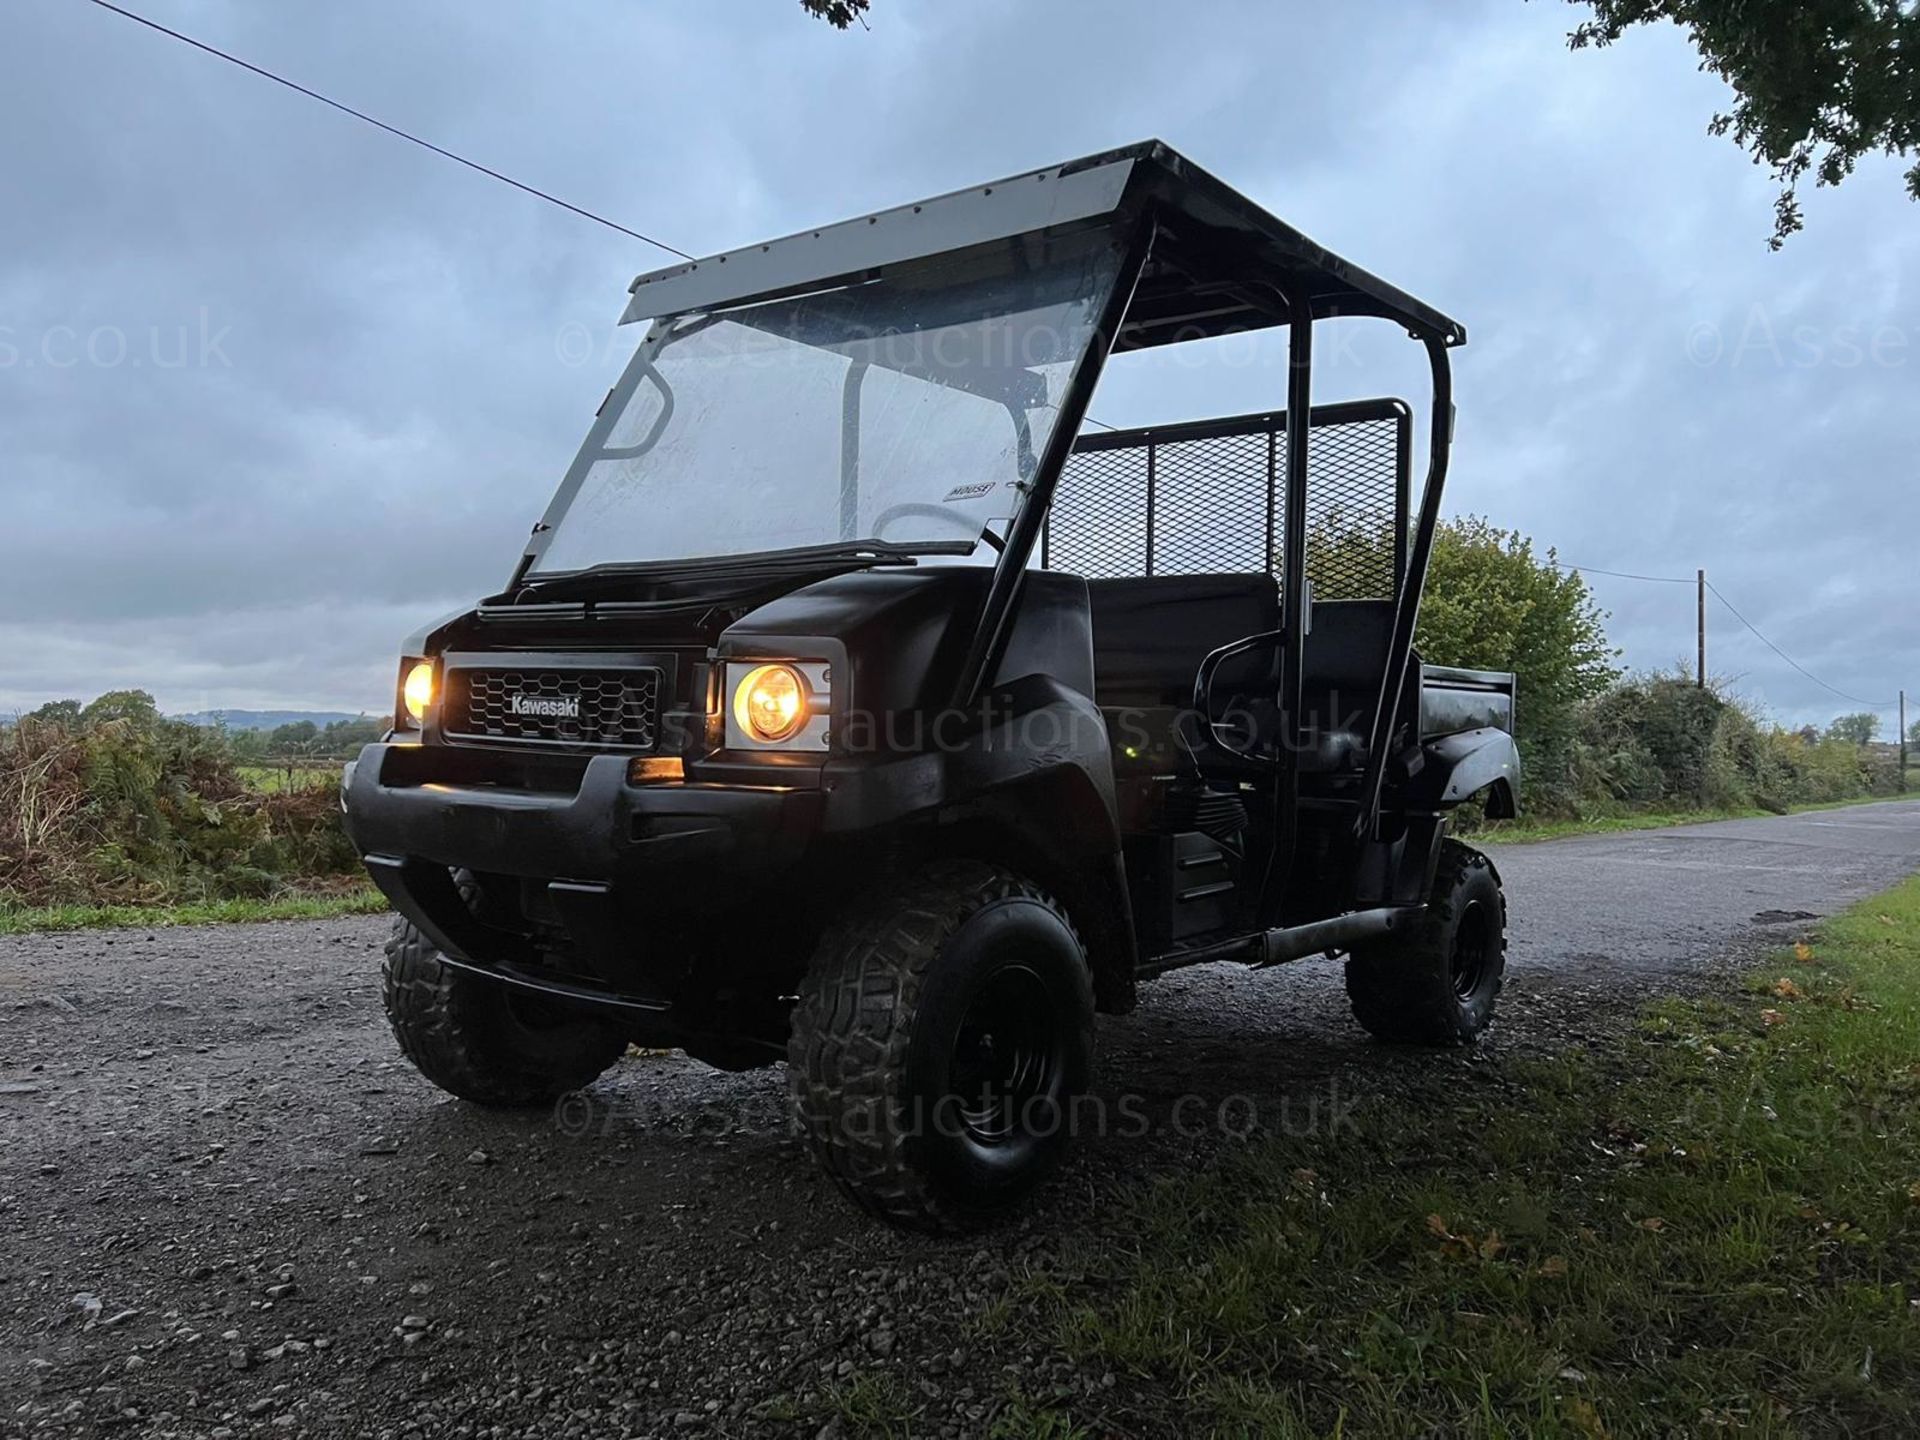 2011 KAWASAKI MULE 4010 4WD DIESEL BUGGI, RUNS AND DRIVES, SHOWING A LOW 2038 HOURS *PLUS VAT* - Image 10 of 19